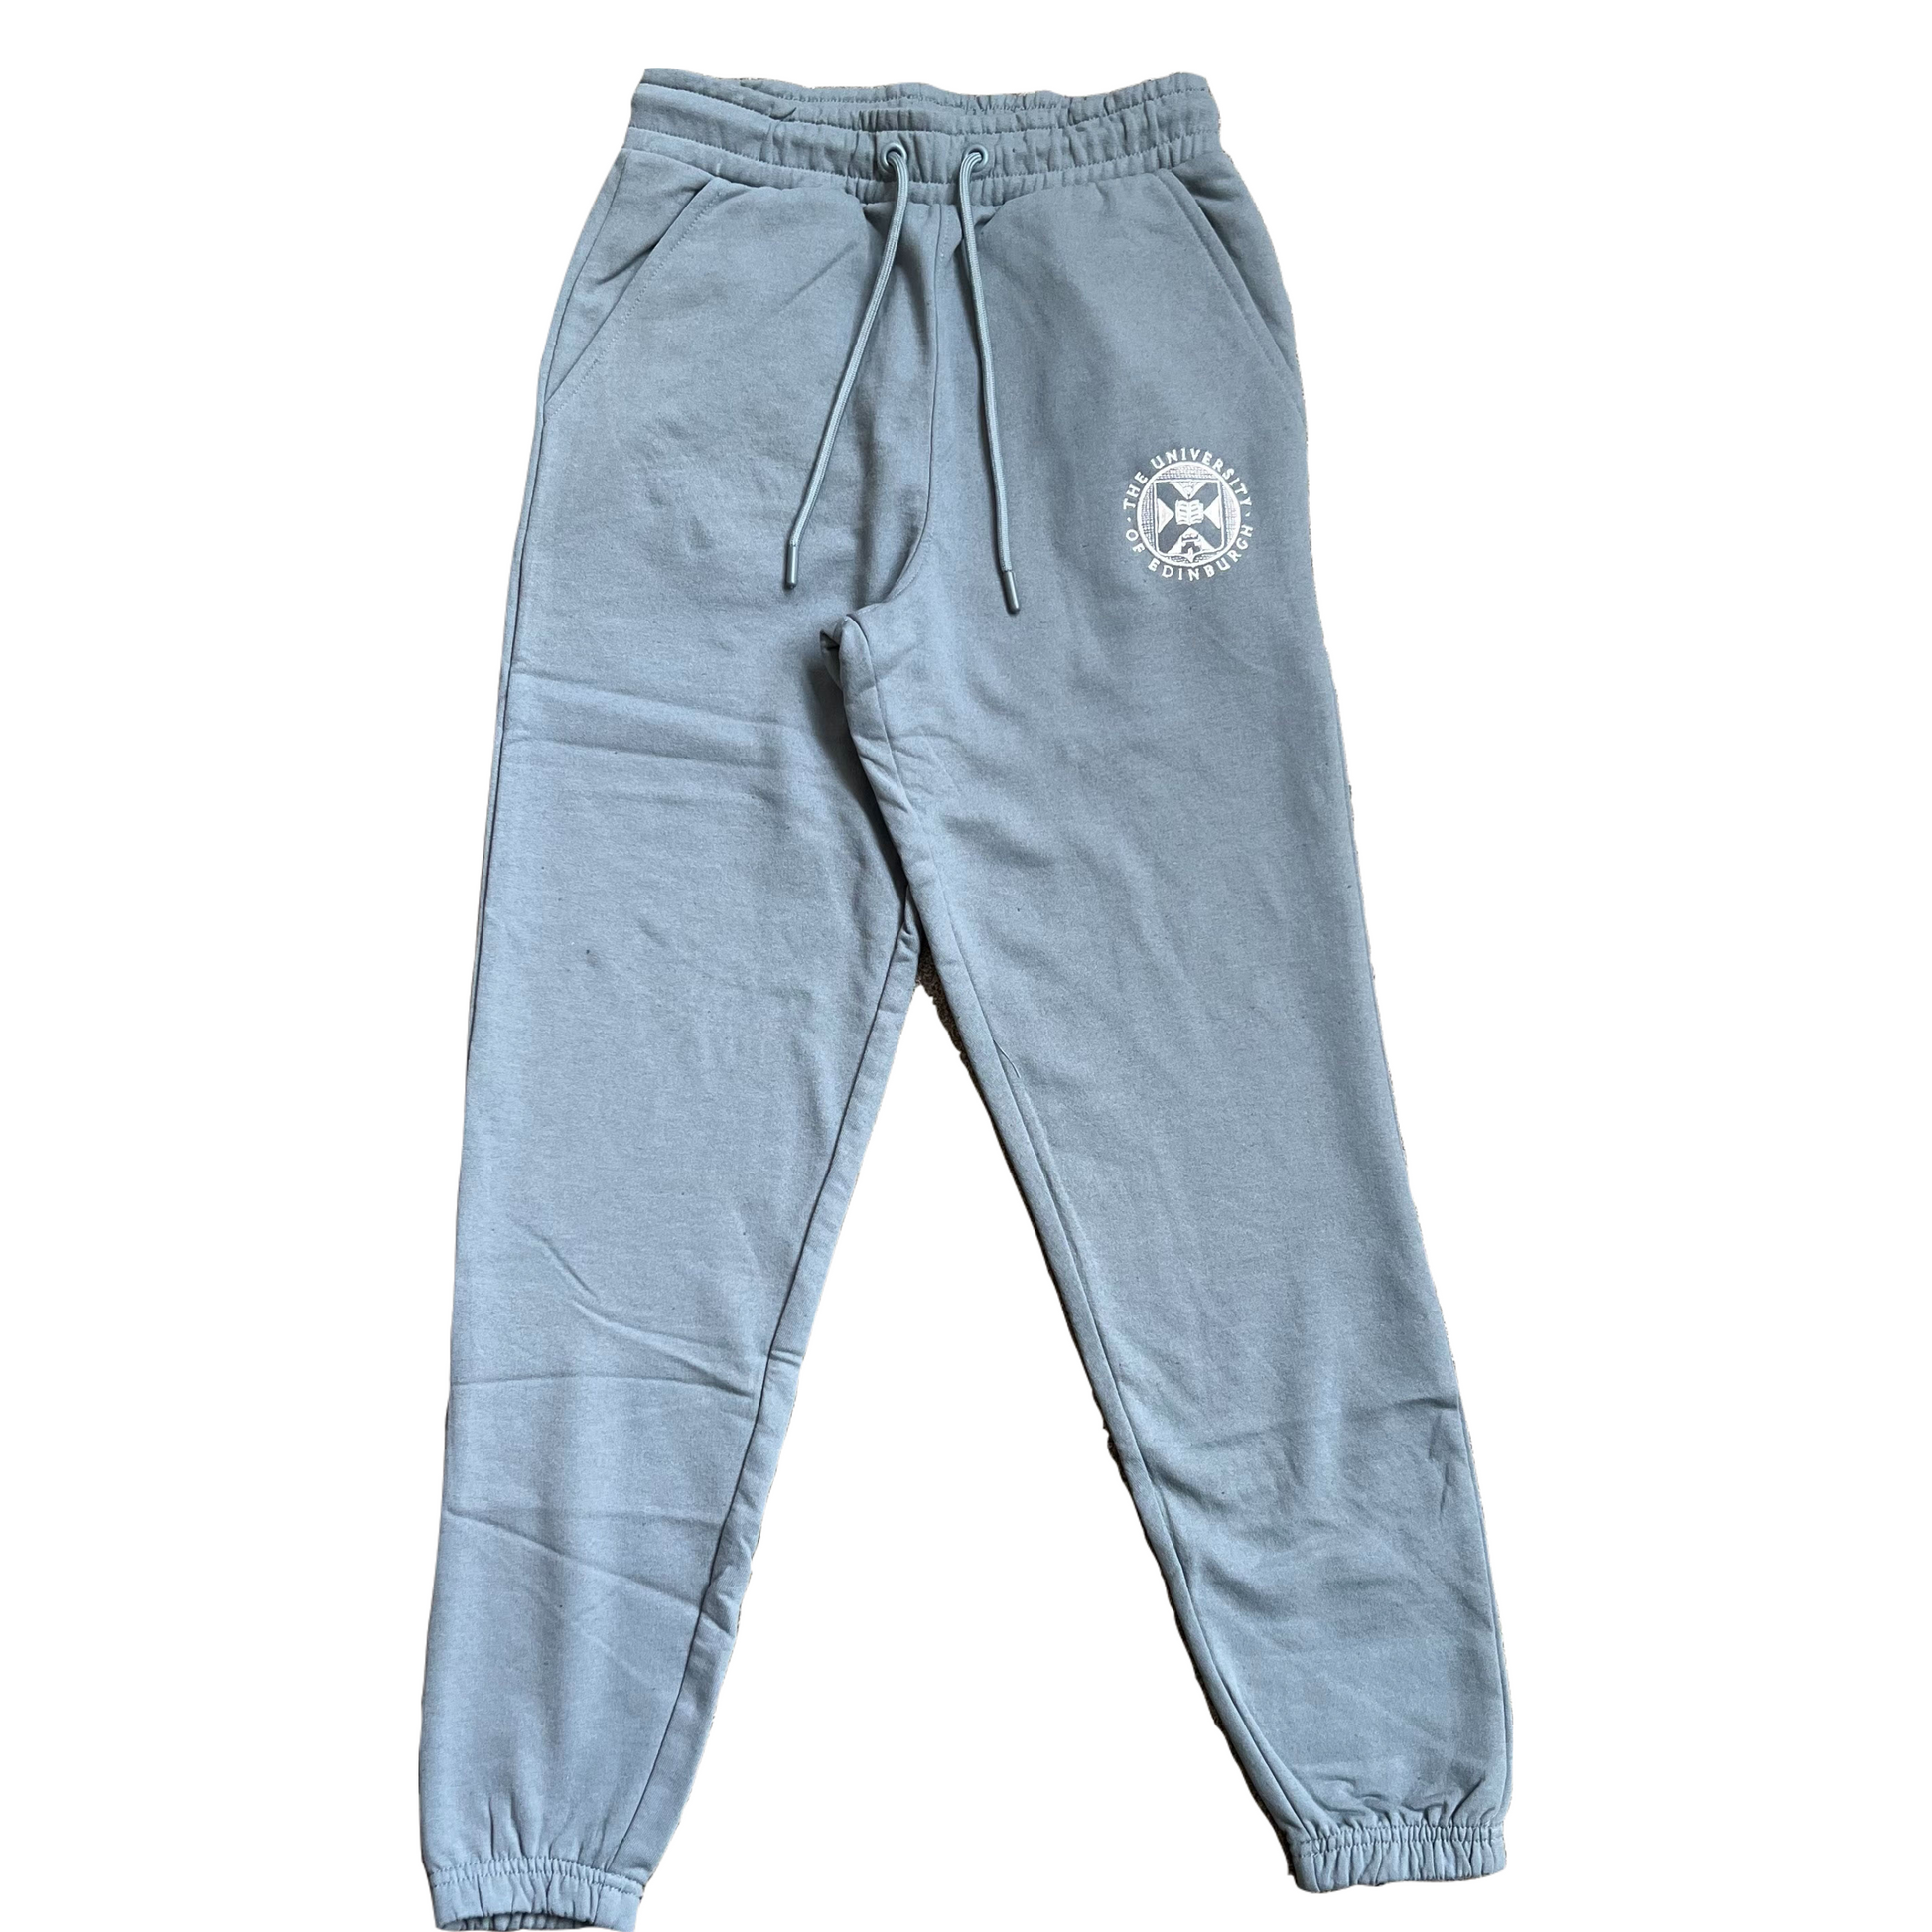 Stone blue jogging bottoms featuring university crest embroidered in white